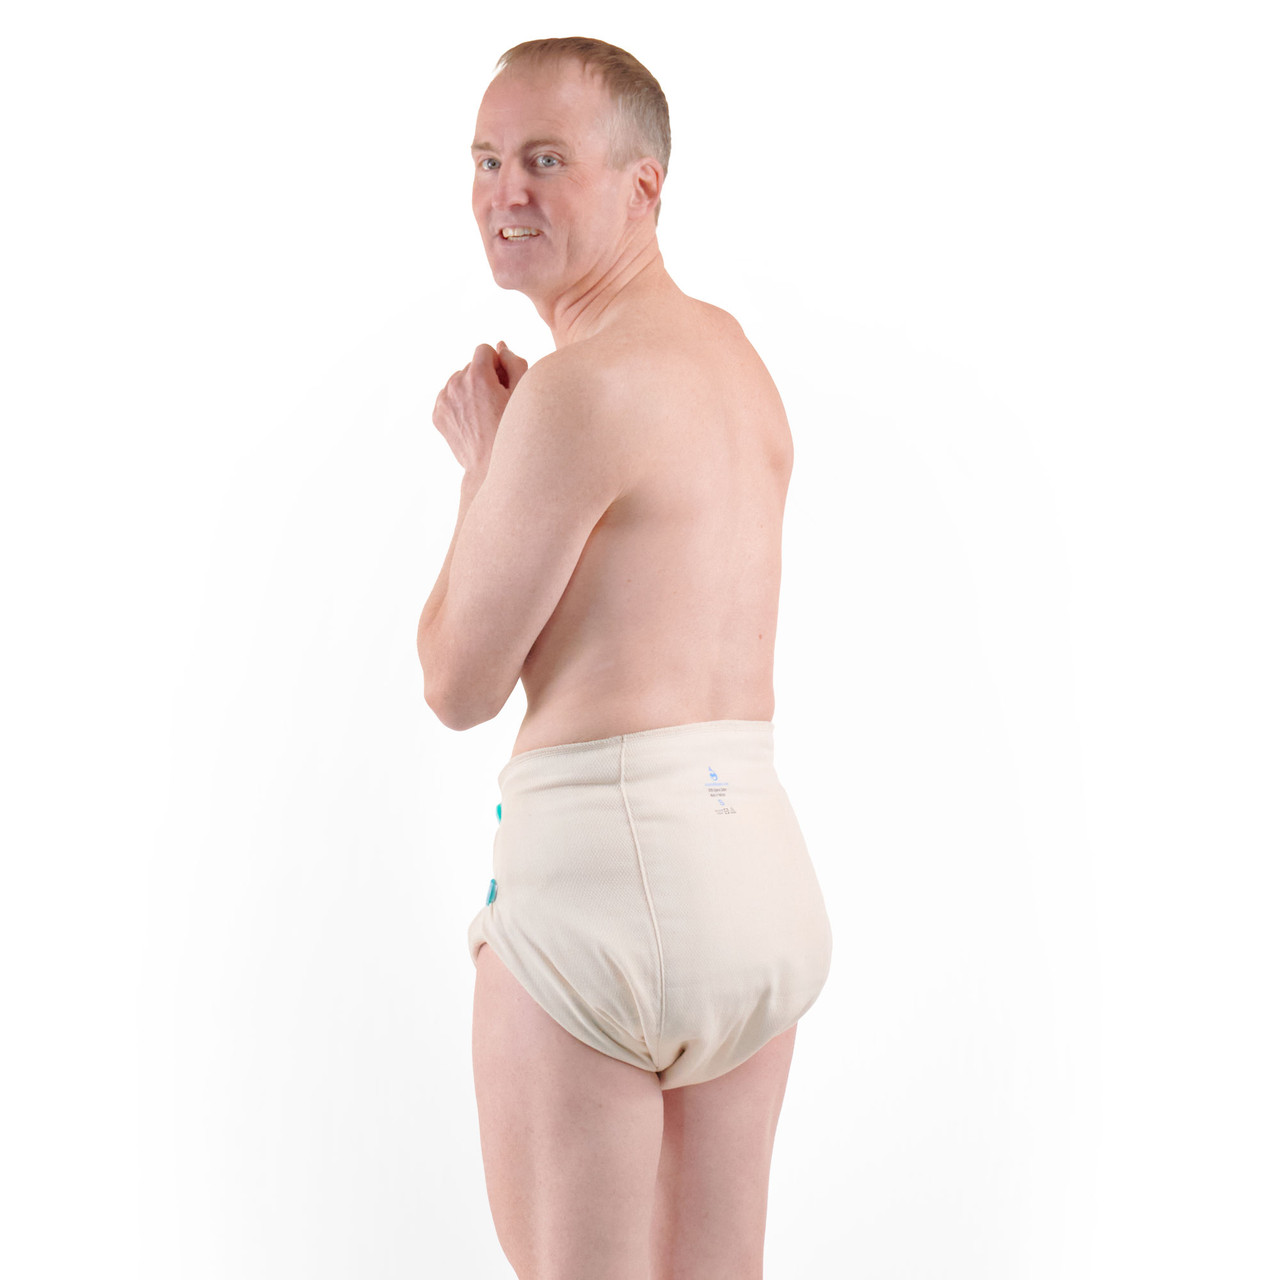 derek ovenshire recommends Adults Wearing Cloth Diapers